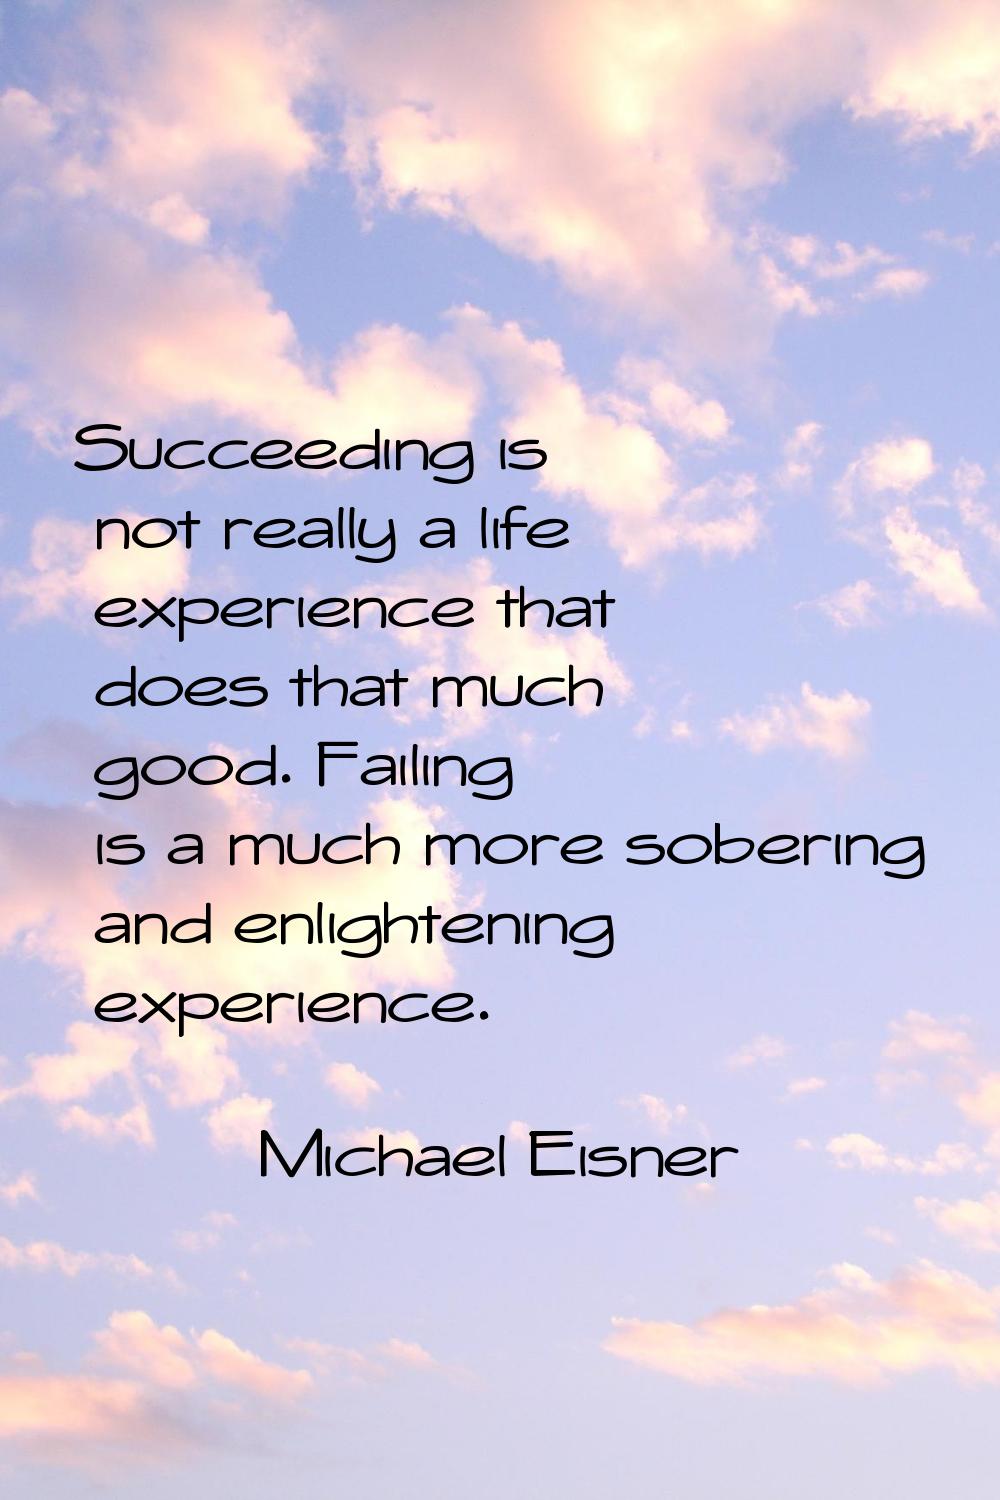 Succeeding is not really a life experience that does that much good. Failing is a much more soberin